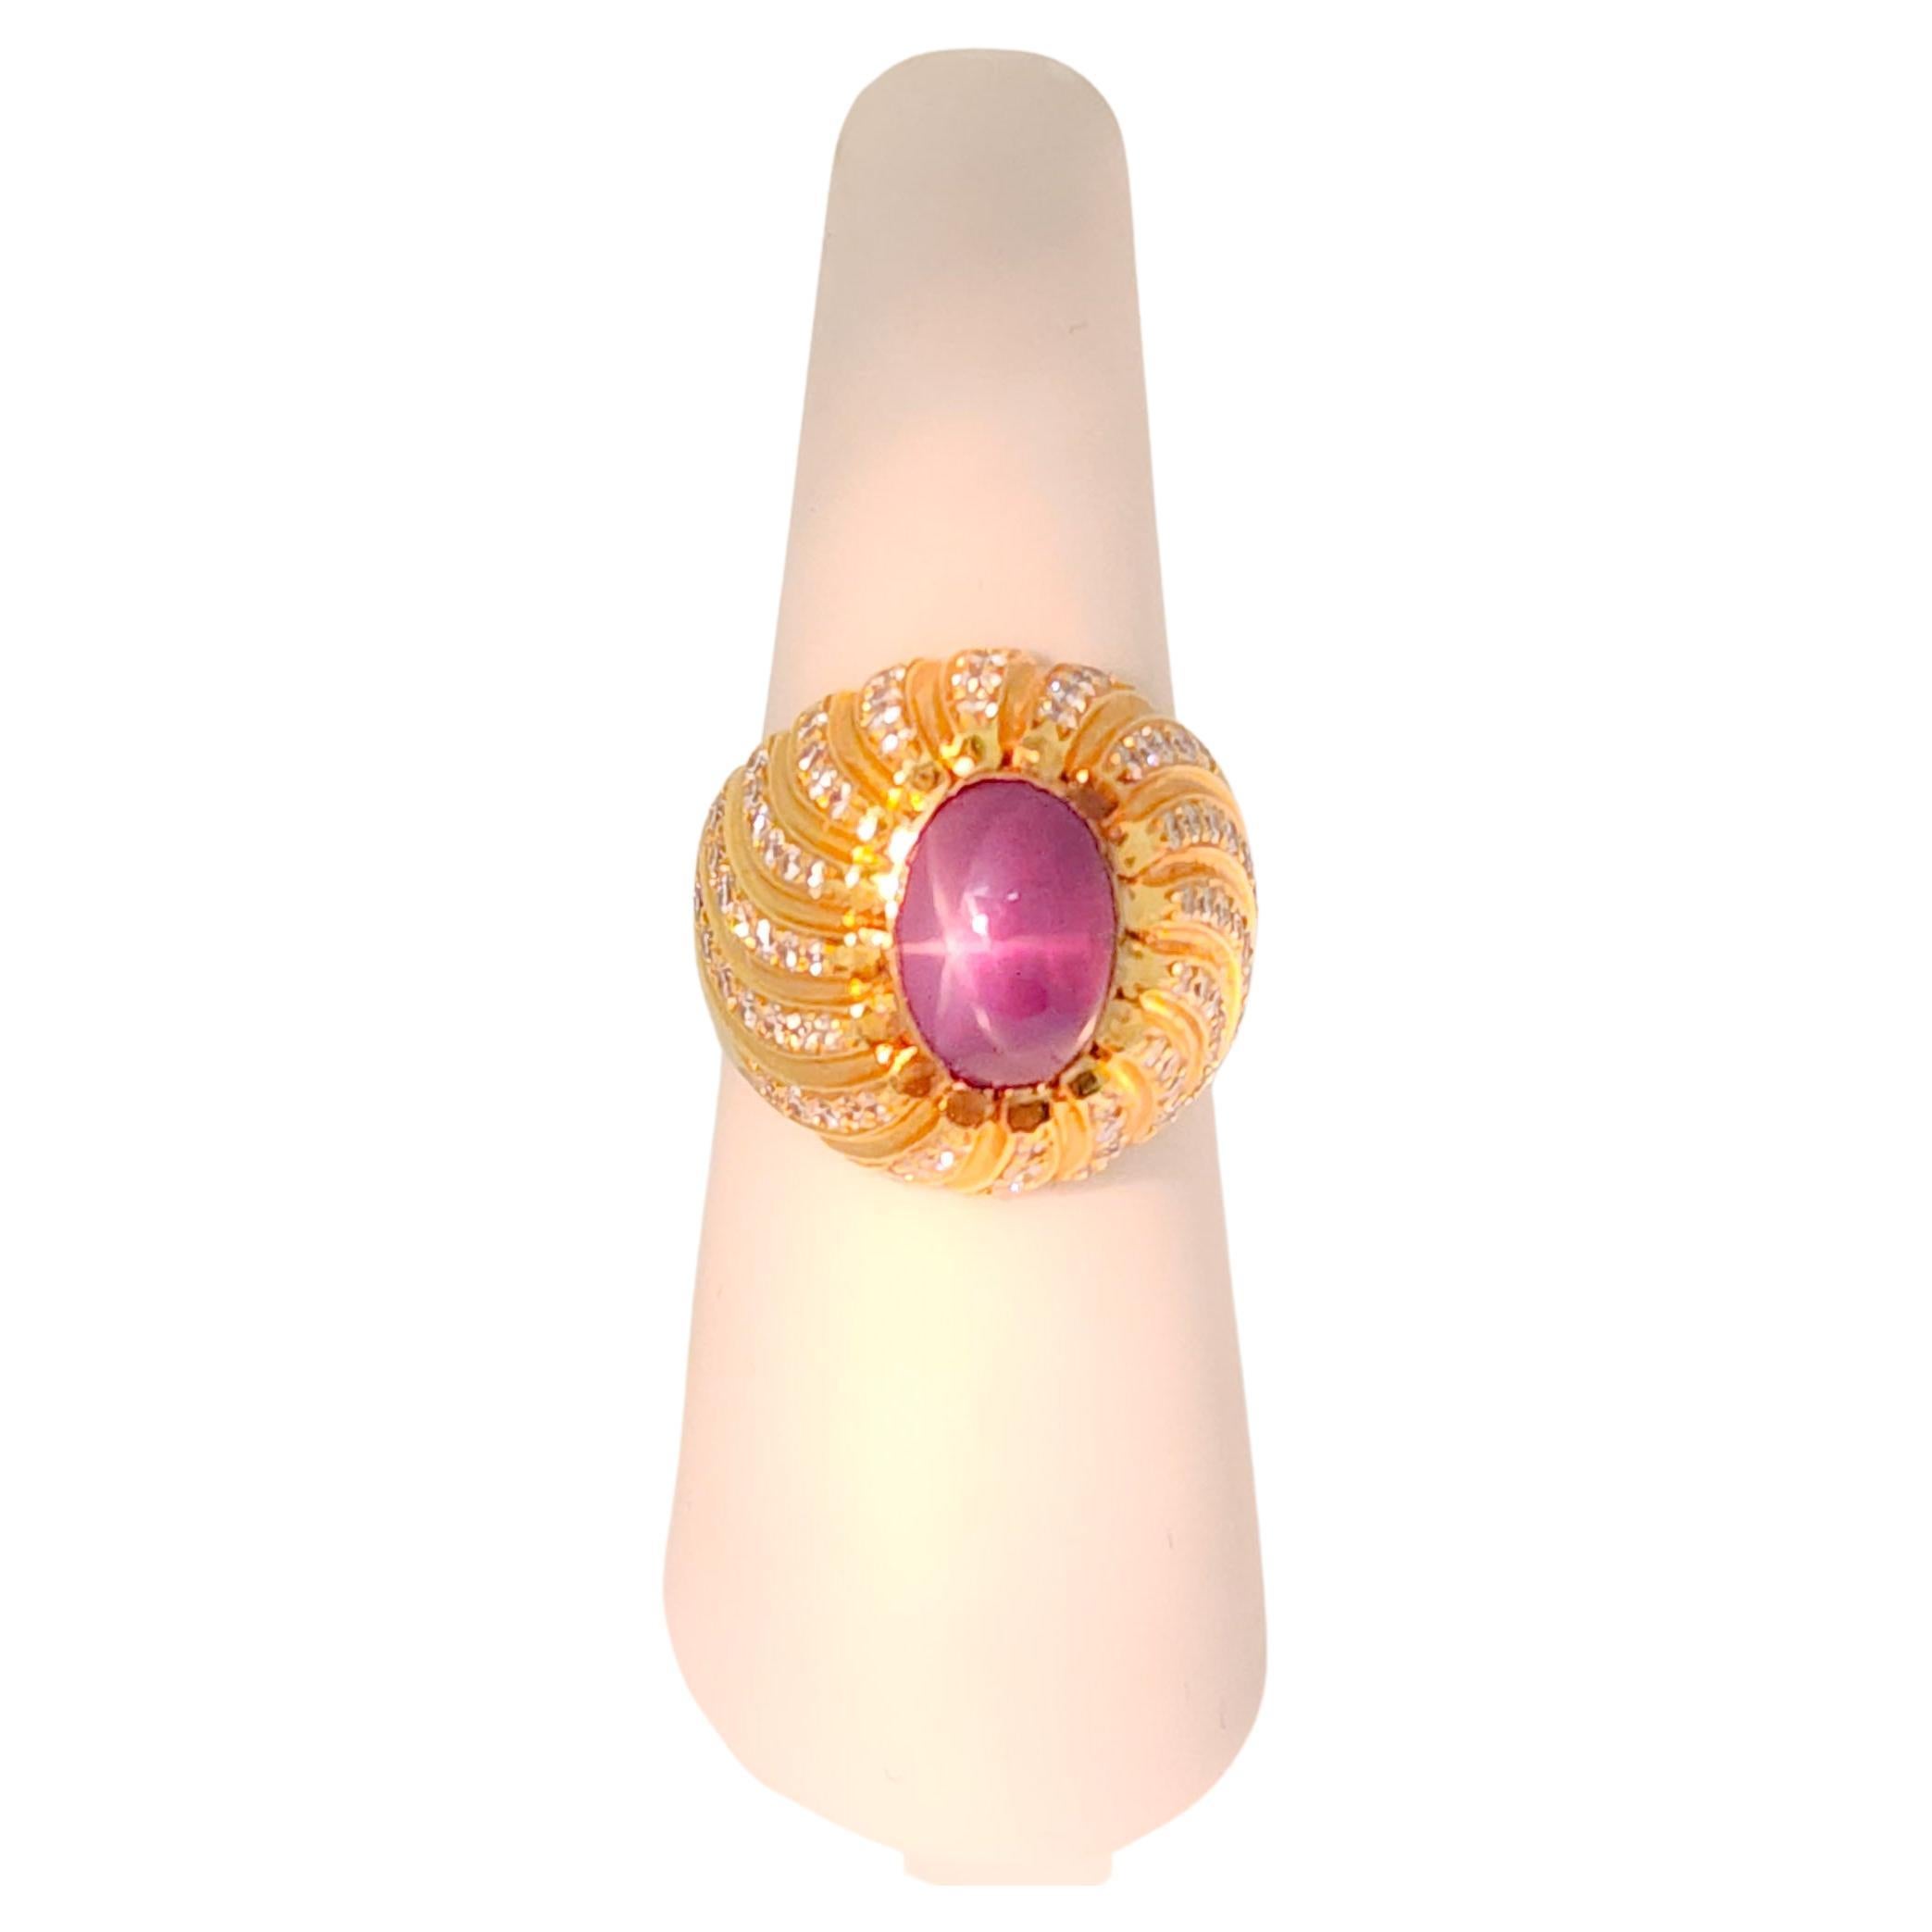 Beautiful purple star sapphire oval cabochon with good quality white diamond rounds.  Handmade in 18k rose gold.  Ring size 7.25.